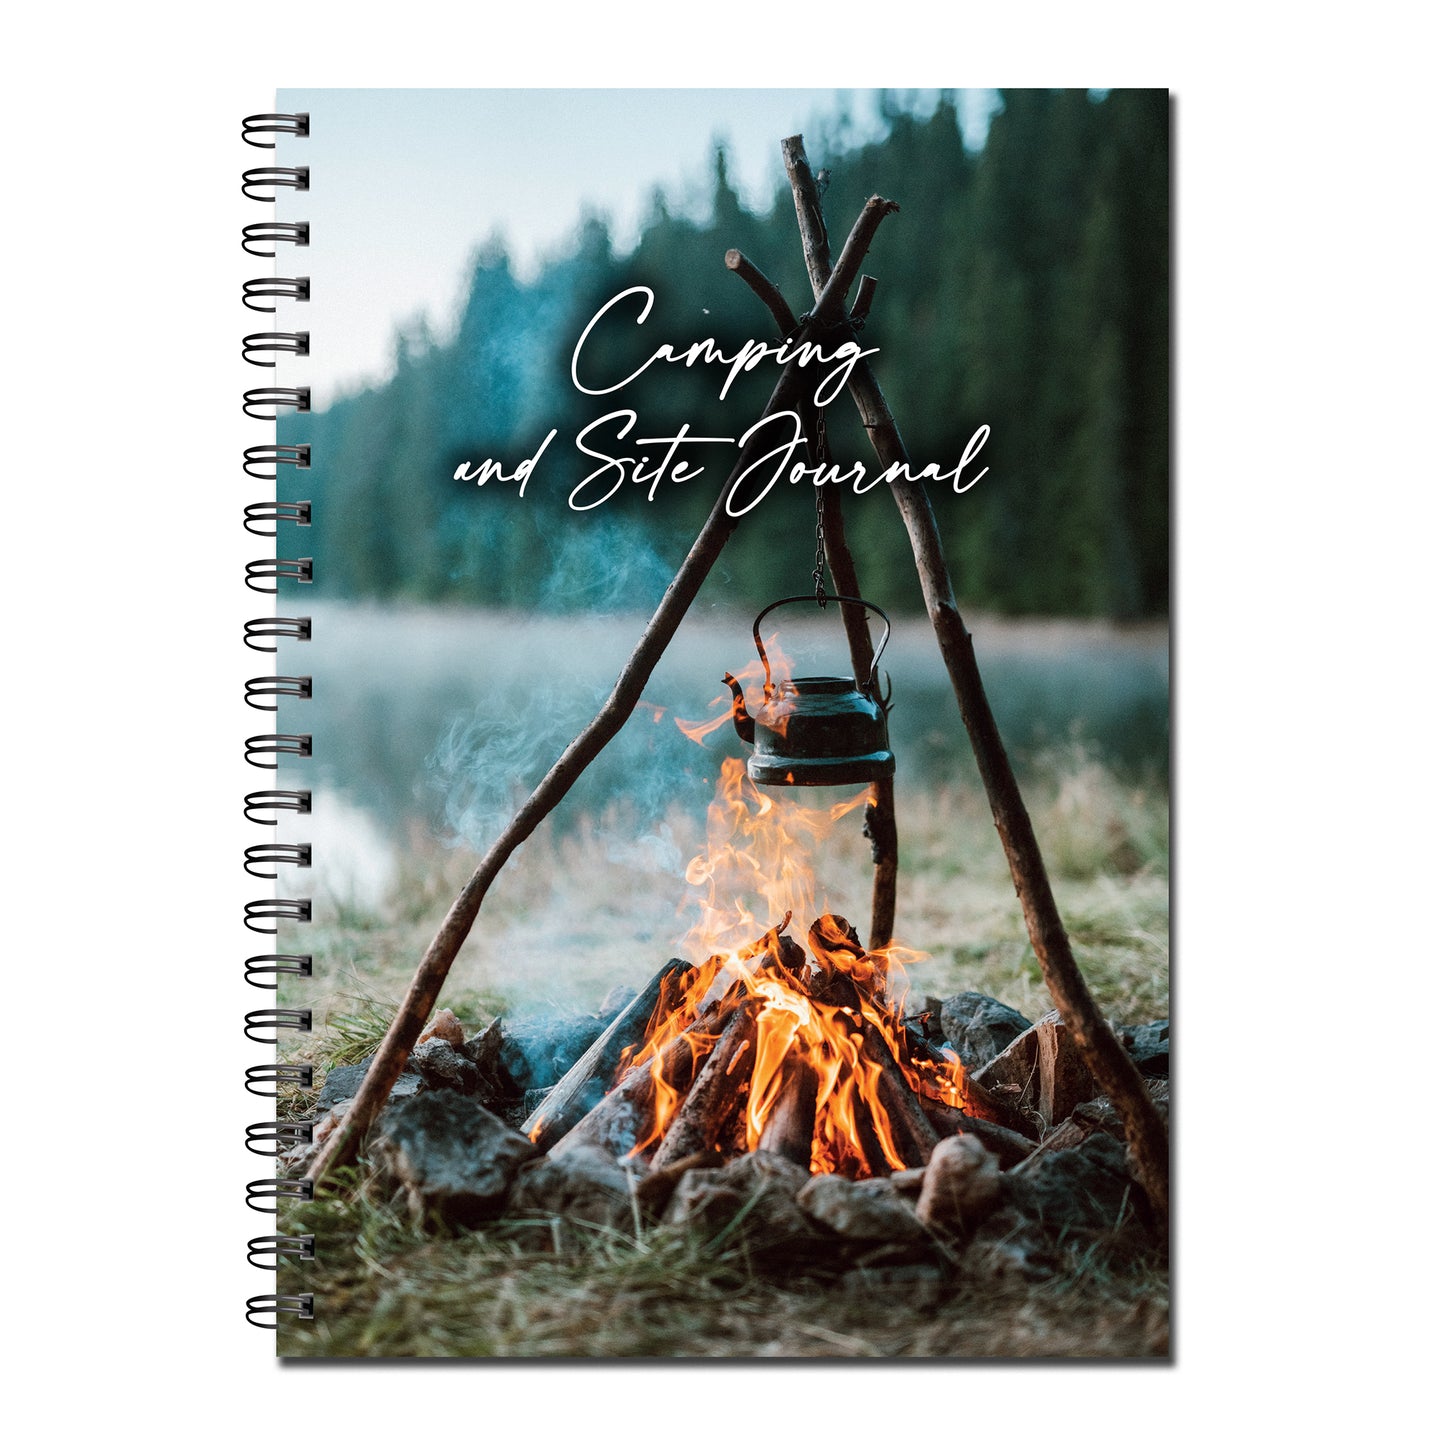 Designer Range Camping/Site Journal | Campsite Review | A5 | 51 double sided pages Wirobound